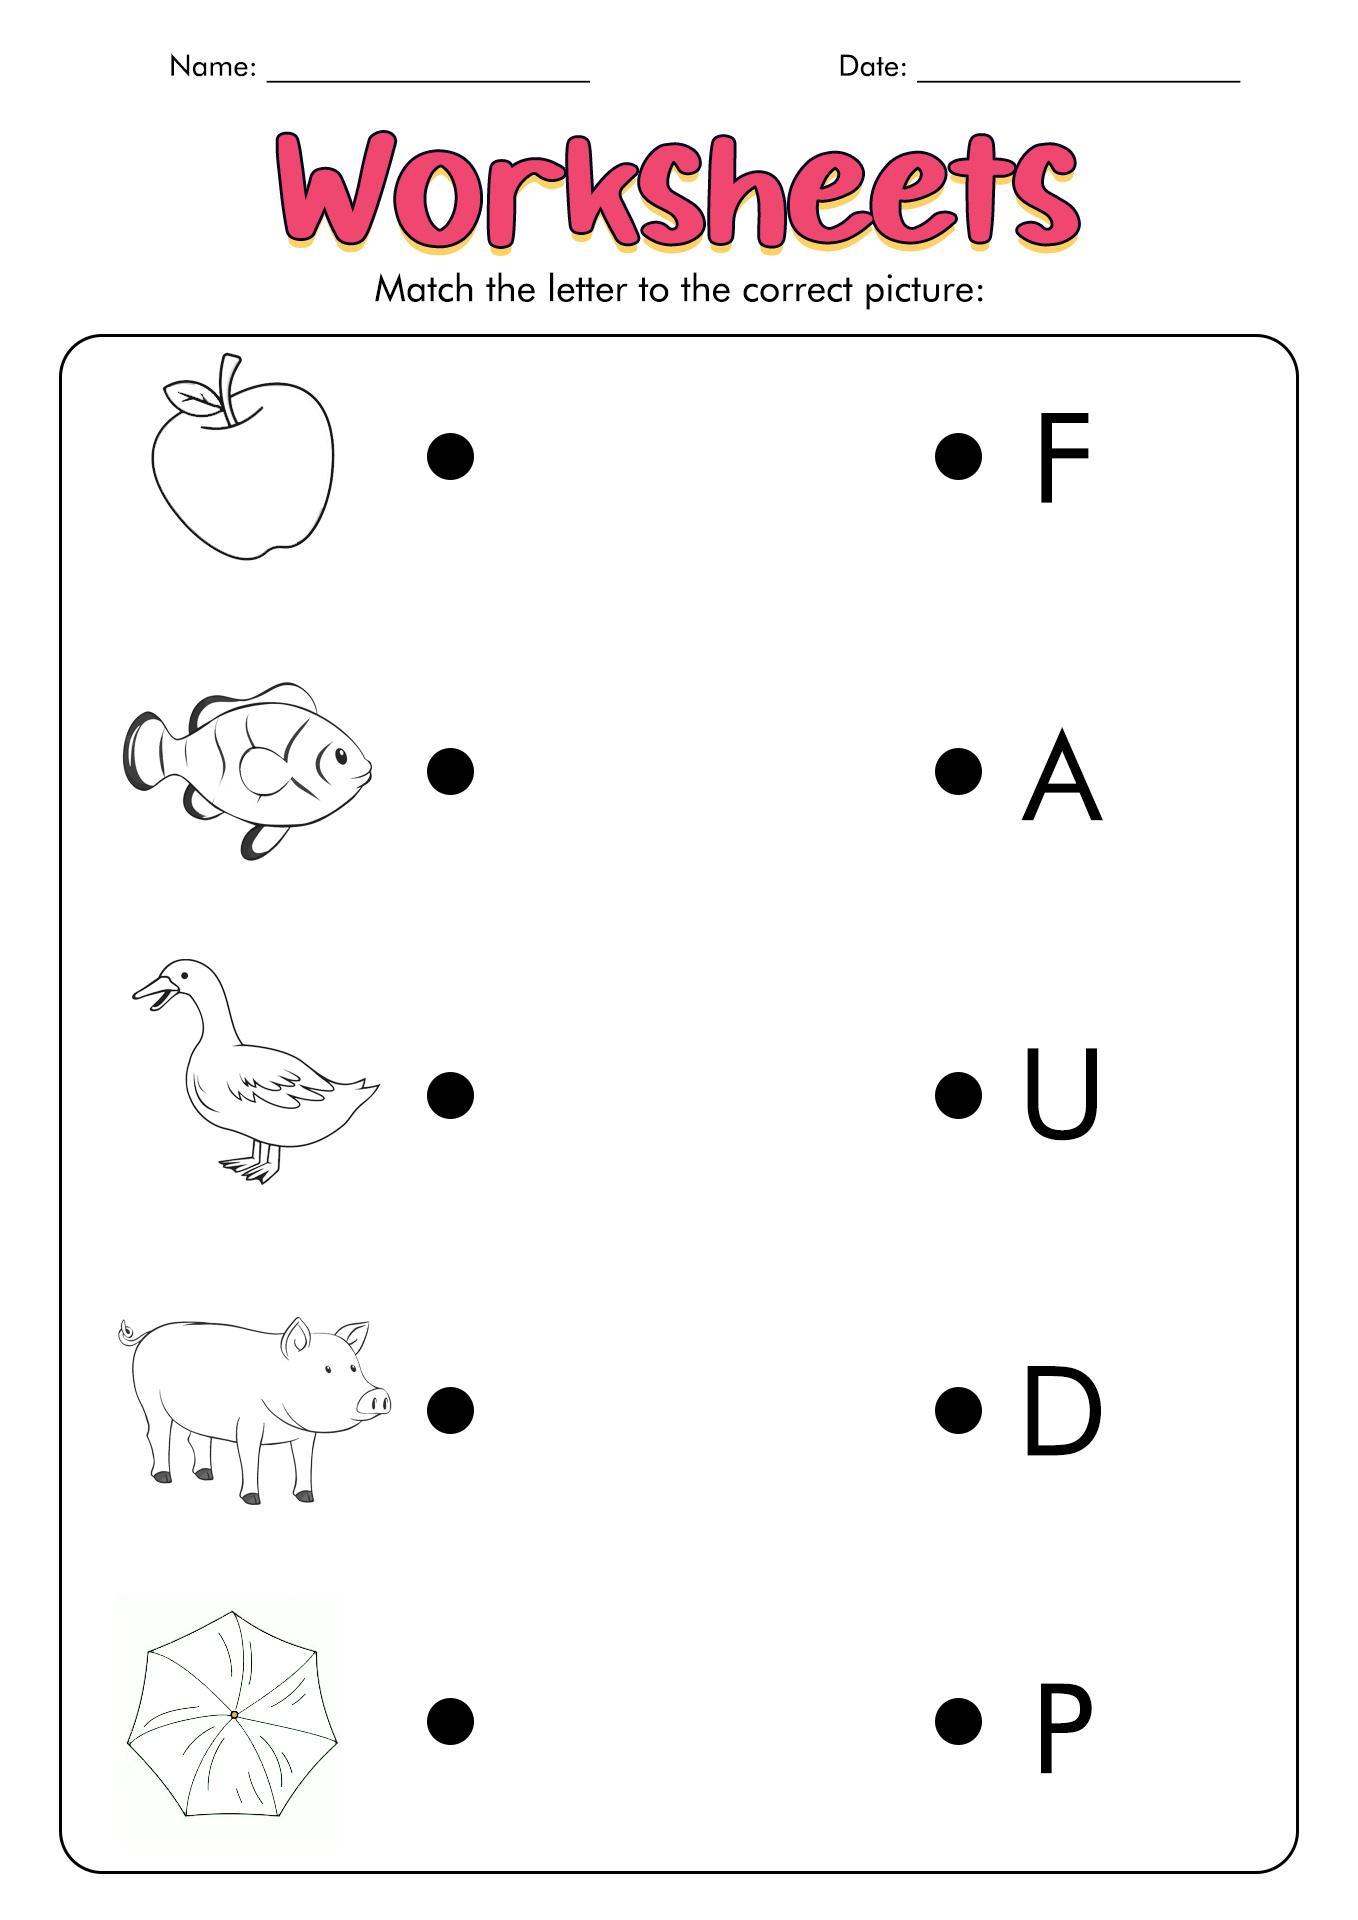 Worksheets for Nursery Class